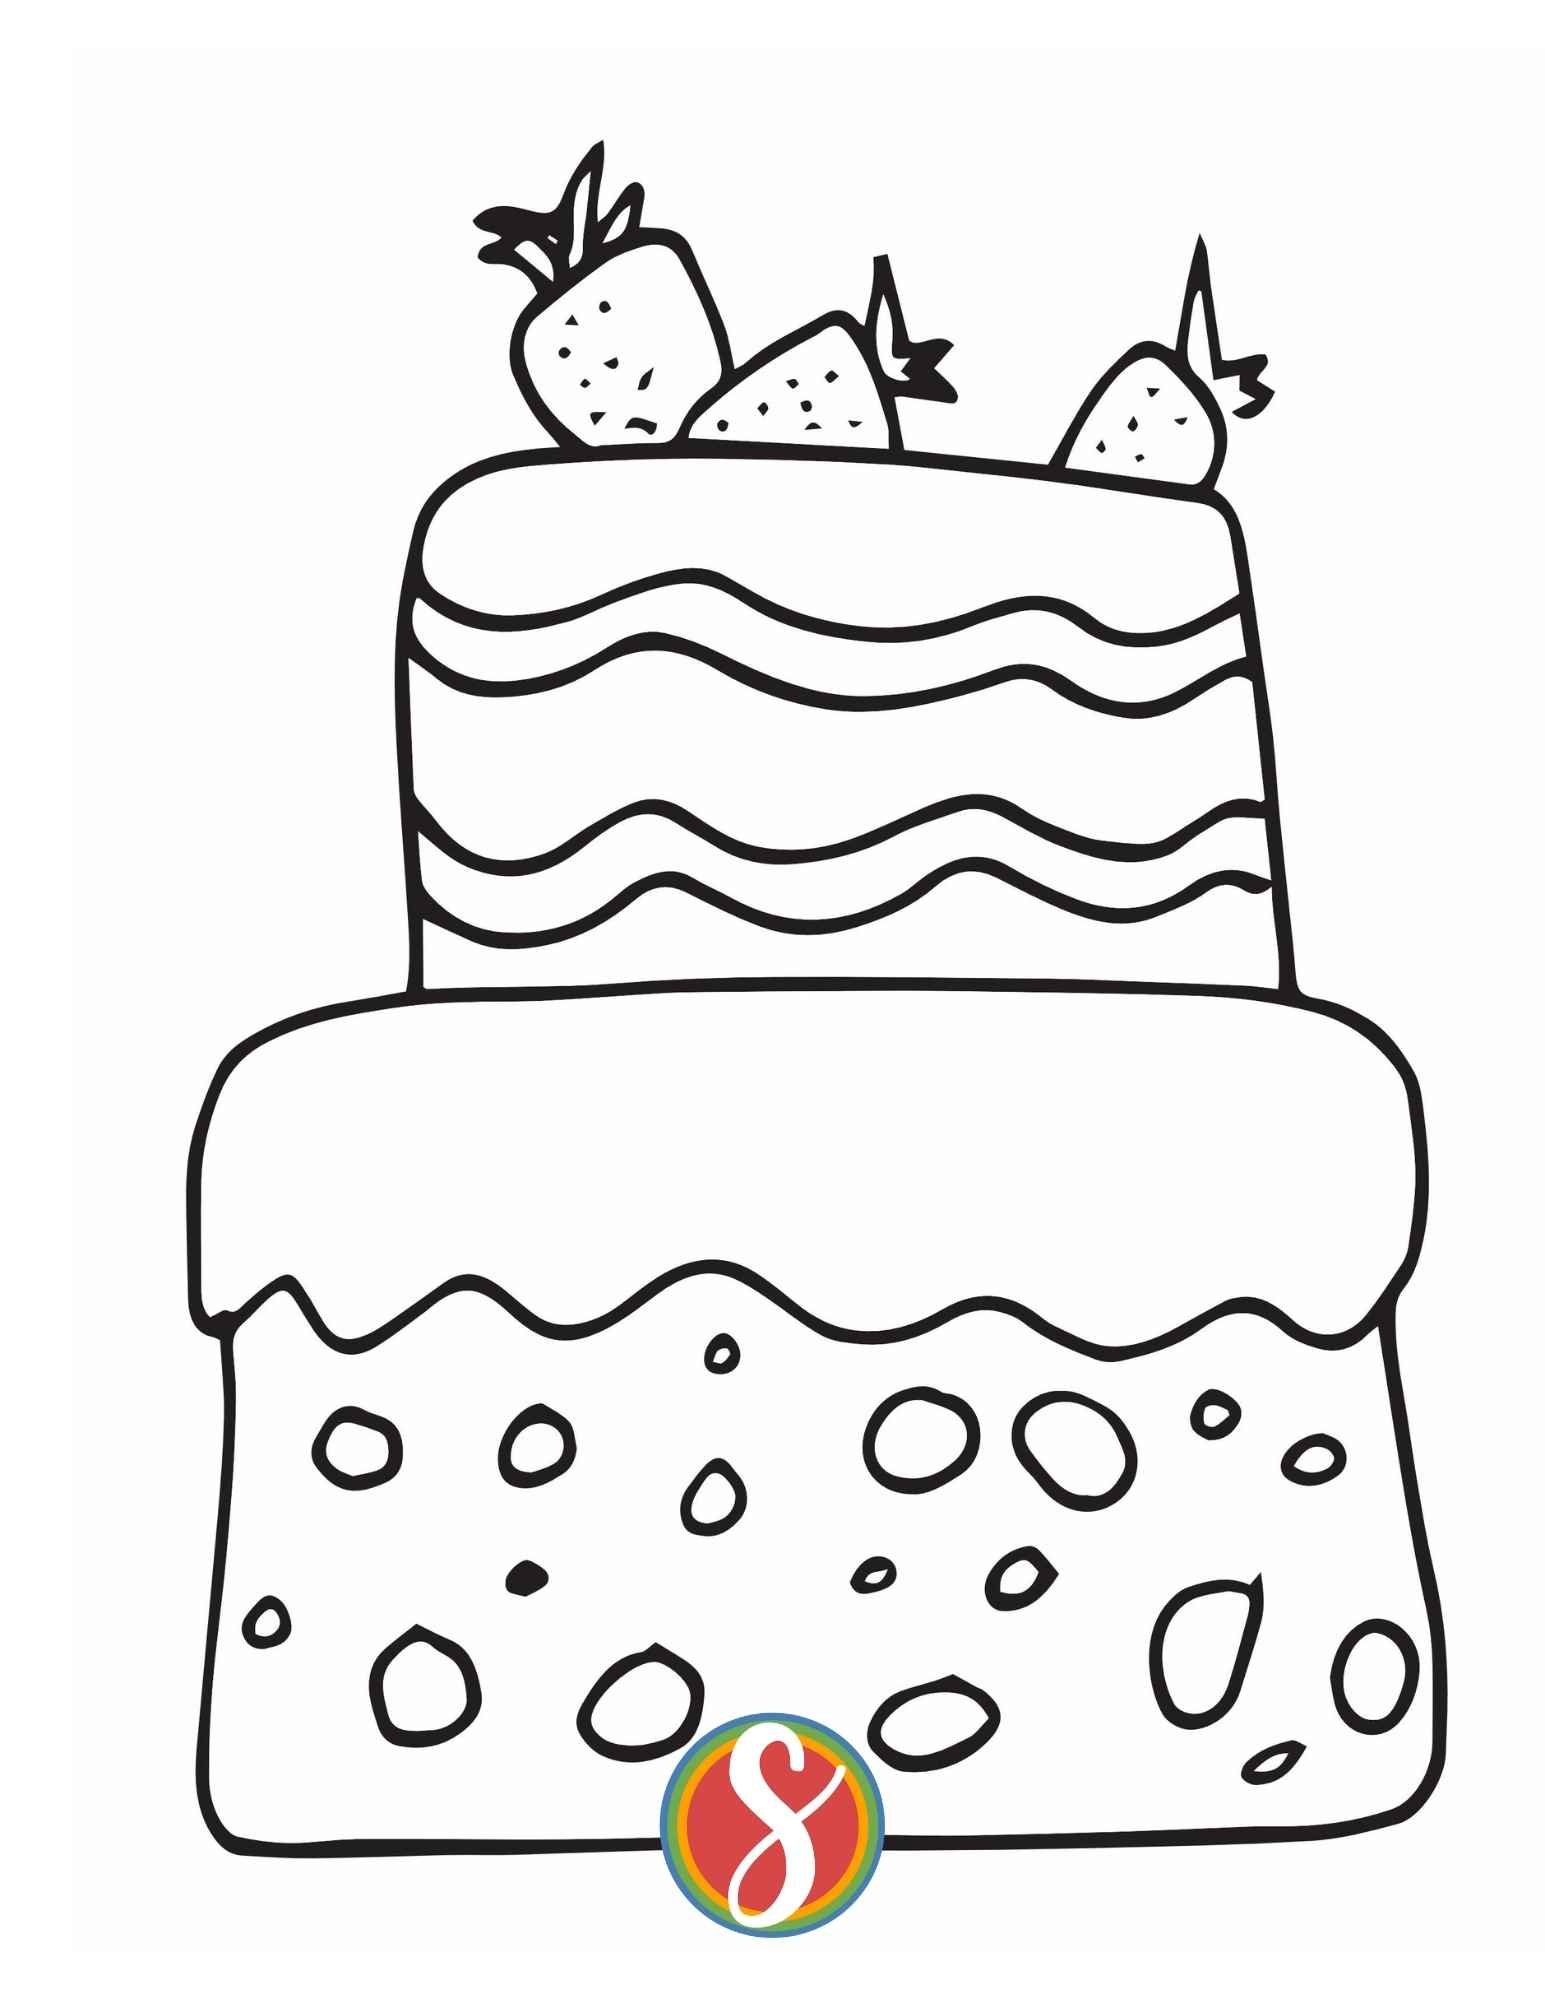 Free cake coloring pages â stevie doodles